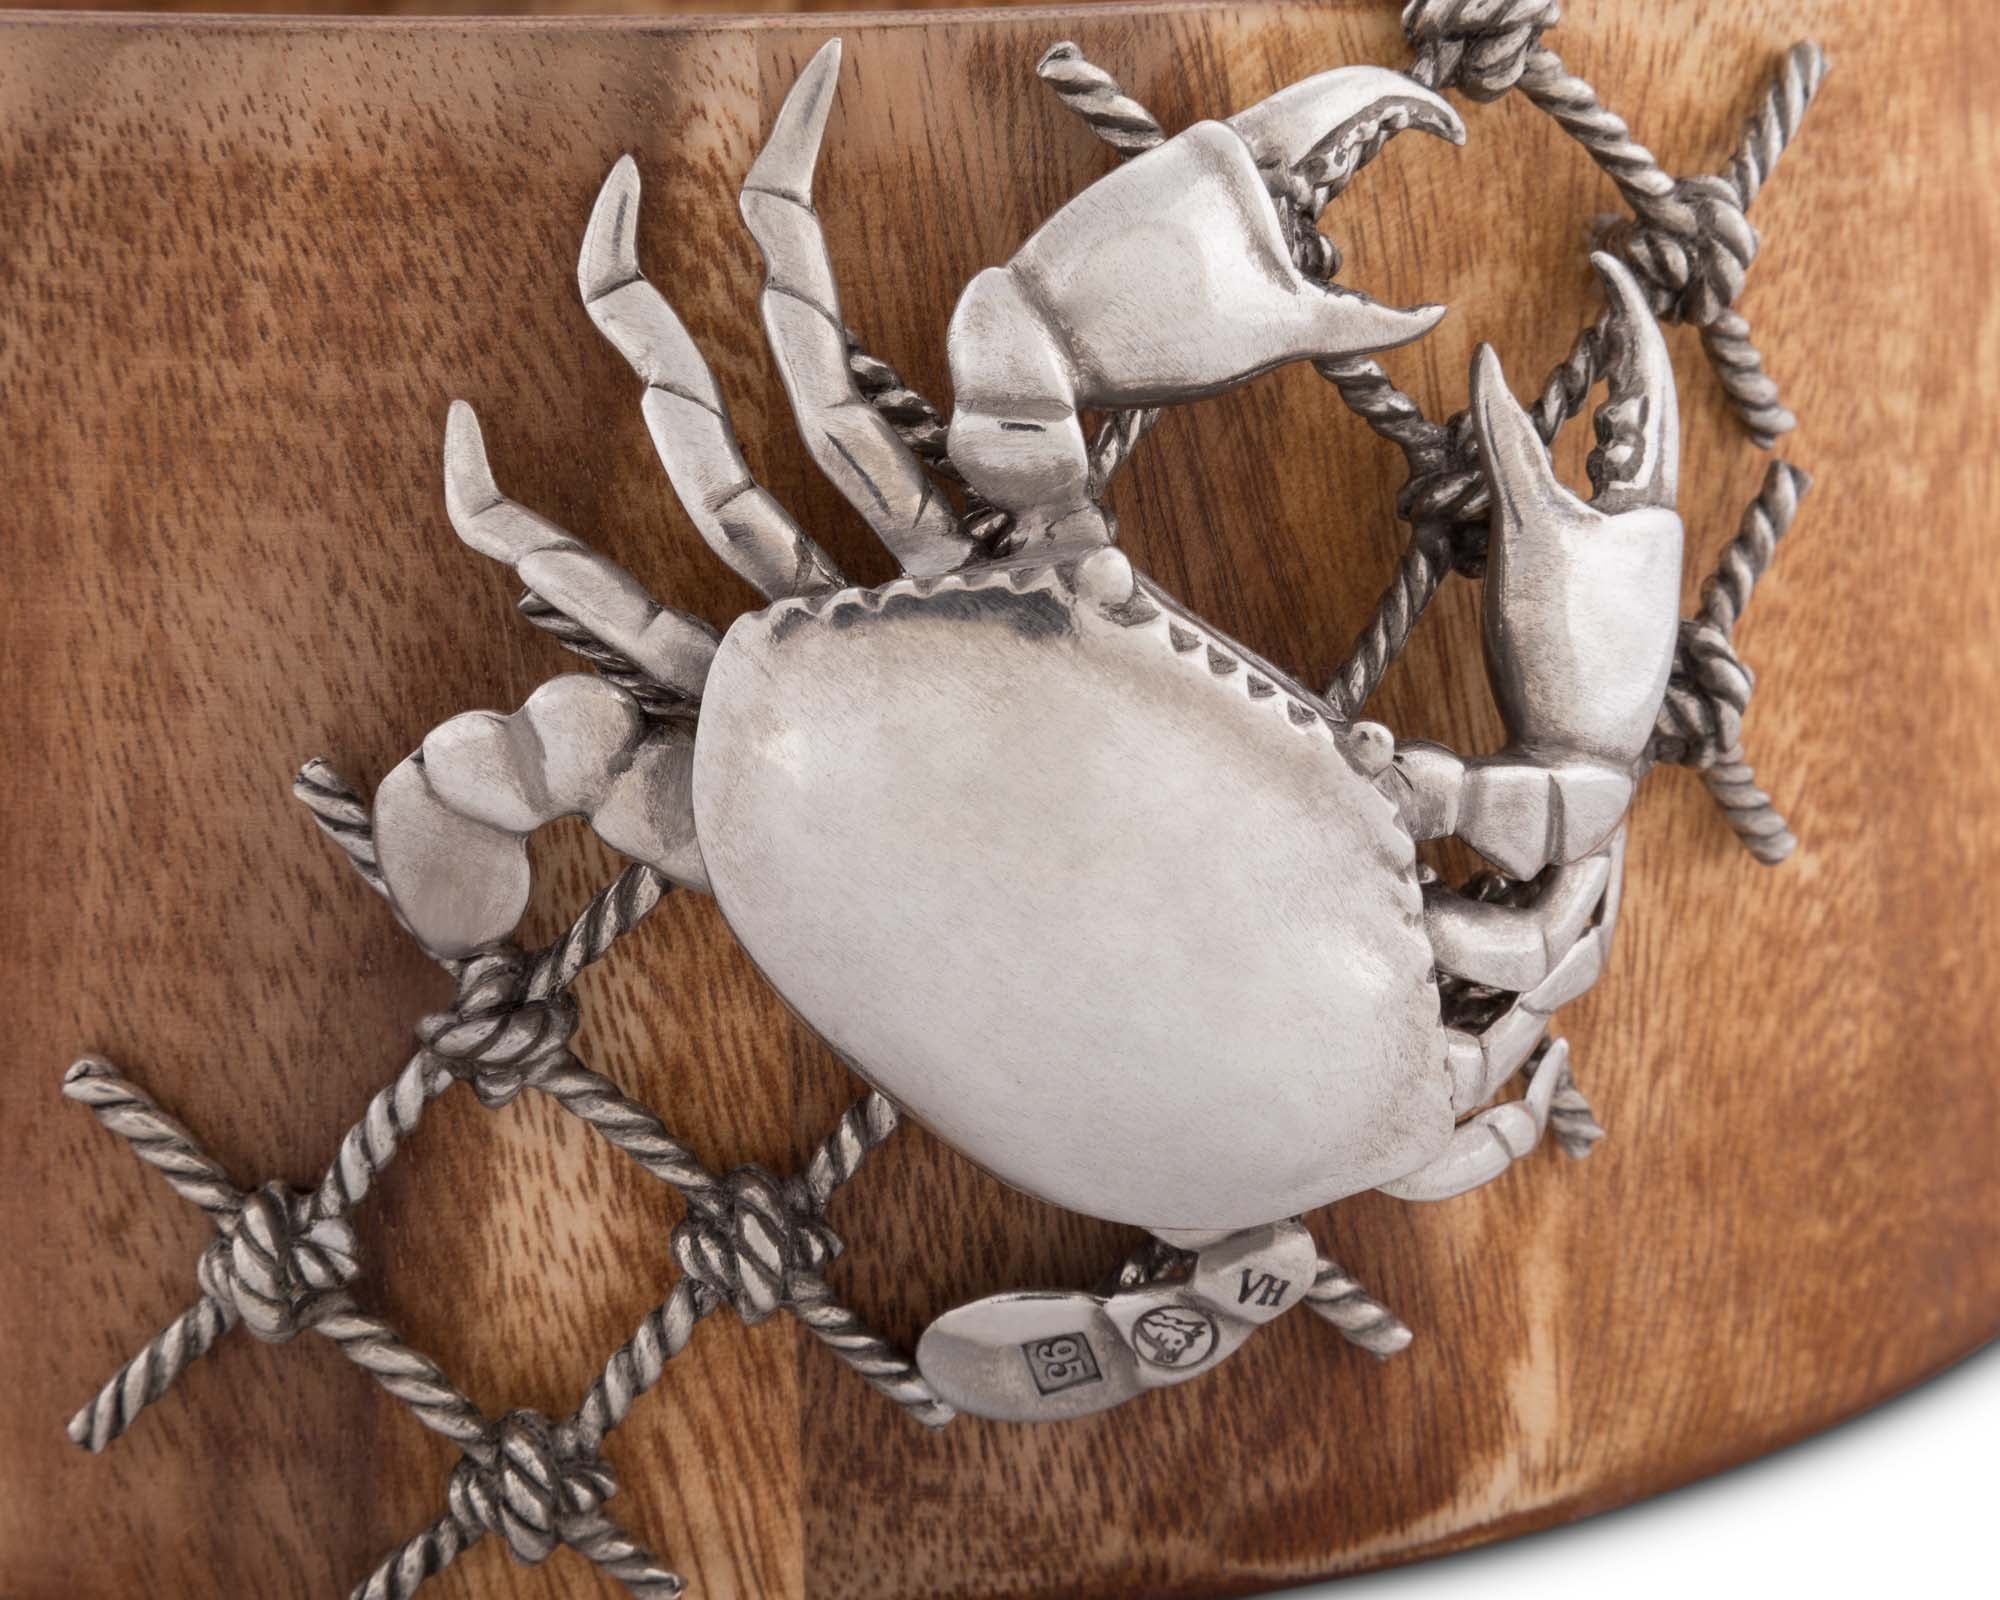 Vagabond House Crab in Net Salad Bowl Product Image